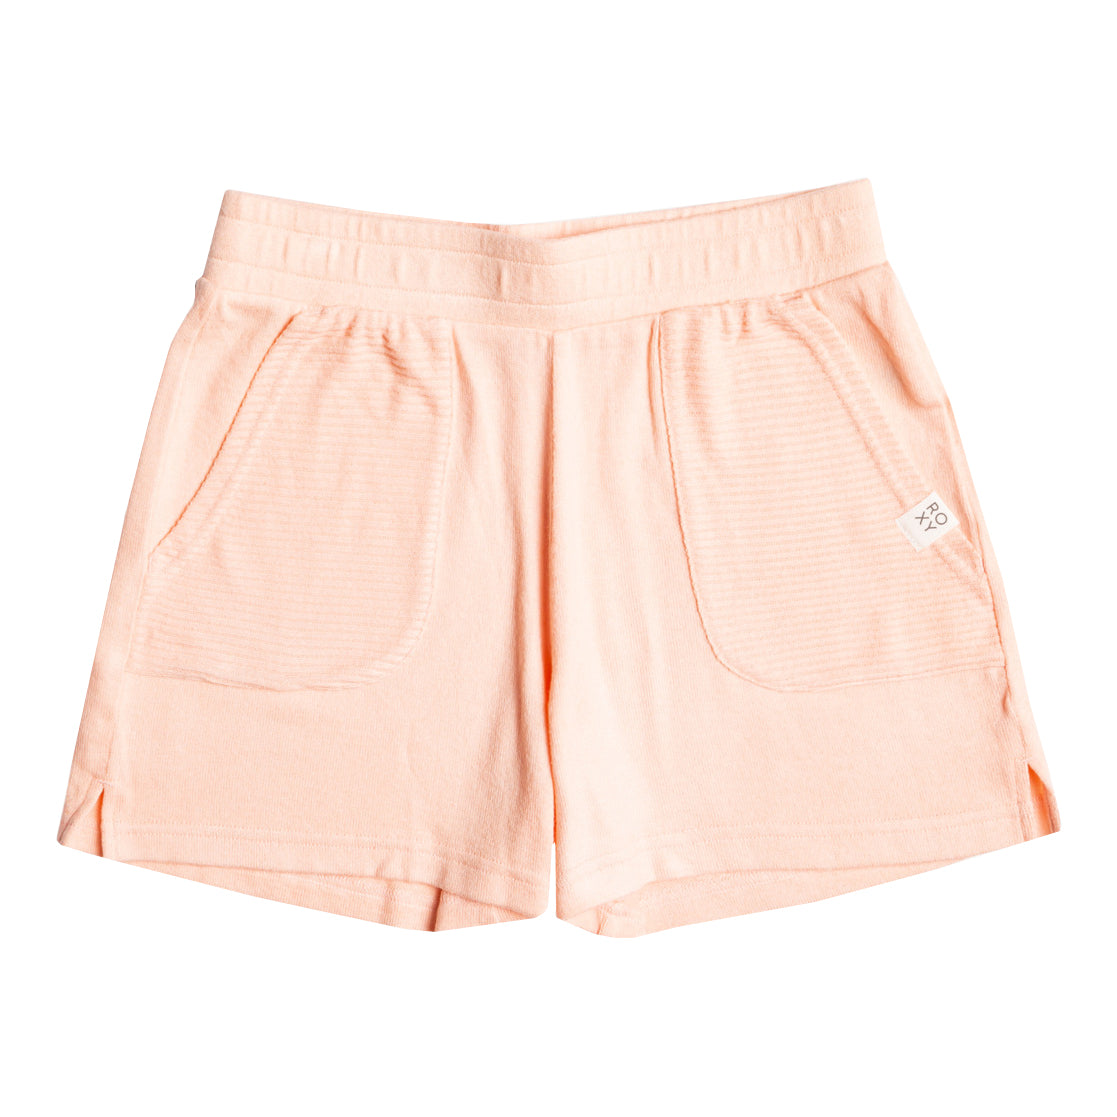 Roxy All The Little Lights Shorts MDR0 8/S